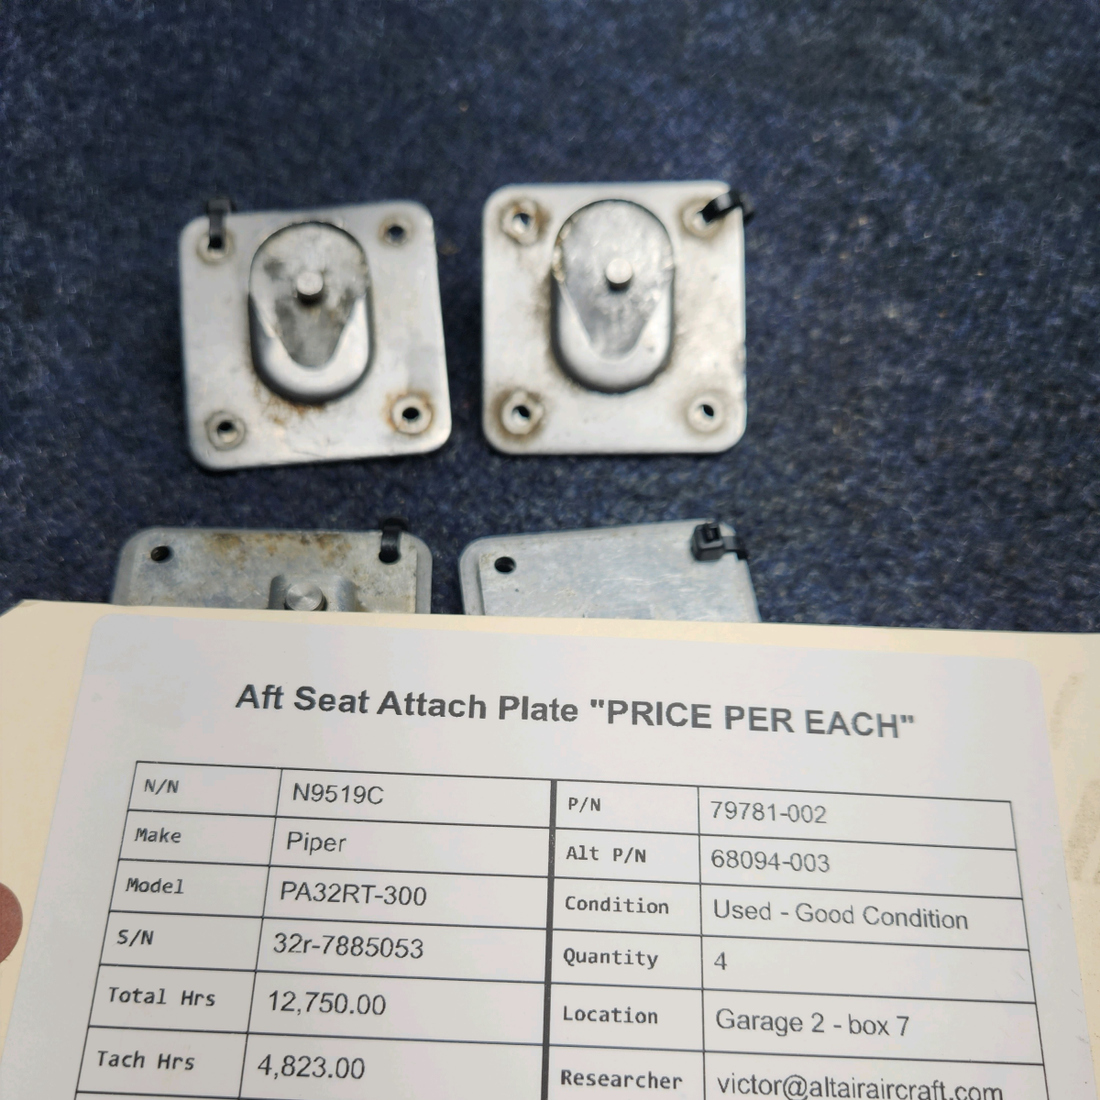 Used aircraft parts for sale, 79781-002 Piper PA32RT-300 AFT SEAT ATTACH PLATE "PRICE PER EACH"